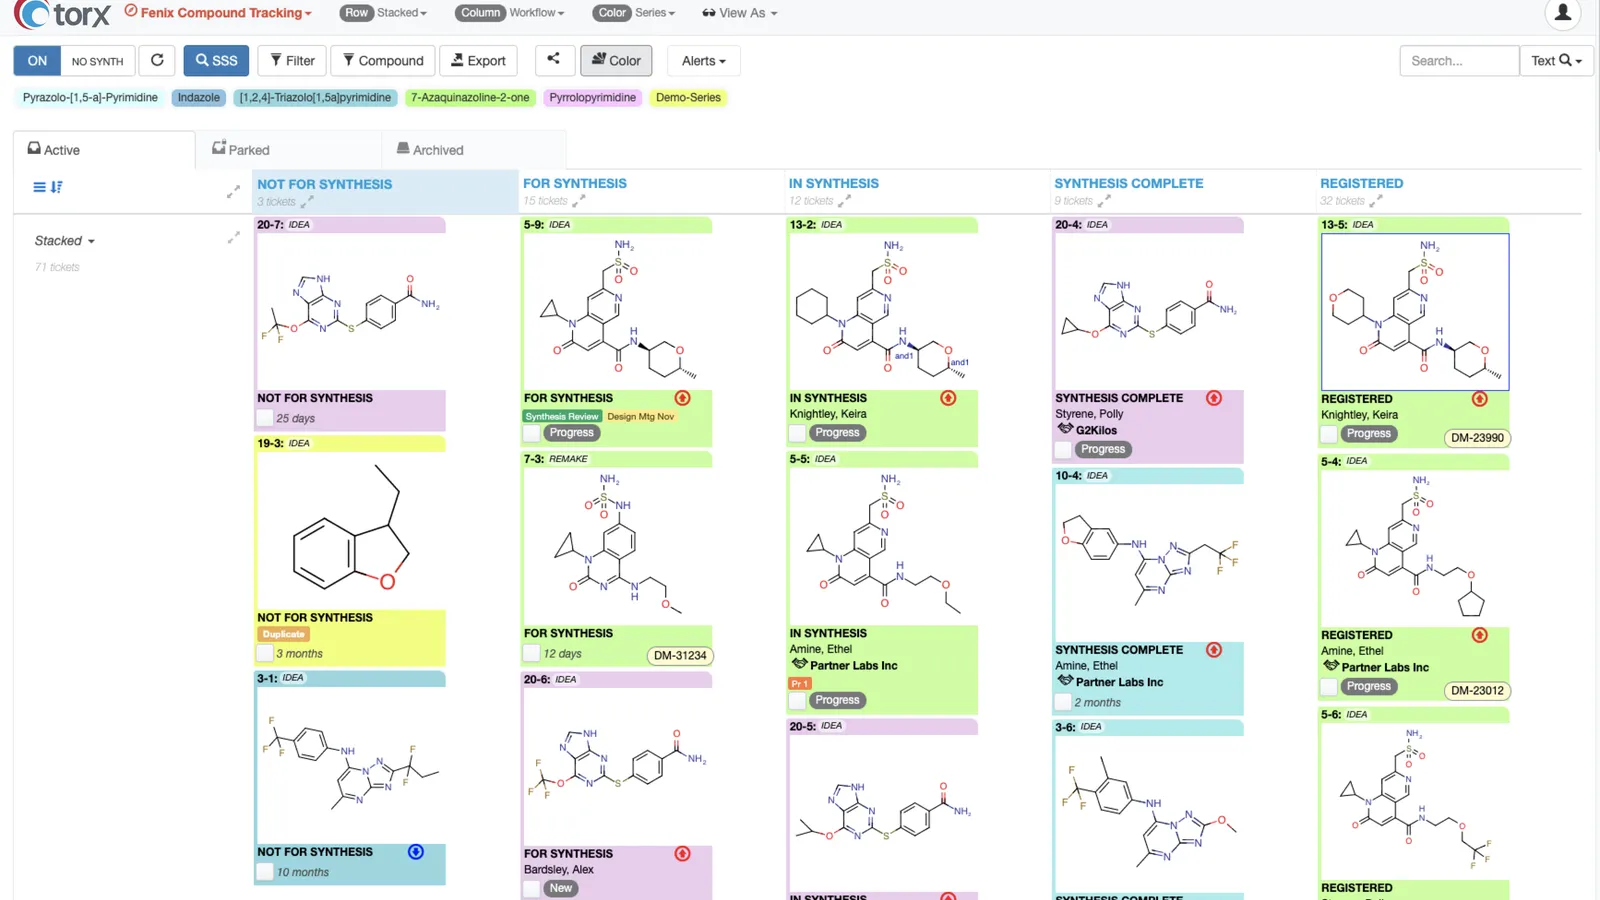 Learn the synthesis status of individual compounds. Visual alert bubbles highlight recent status changes.